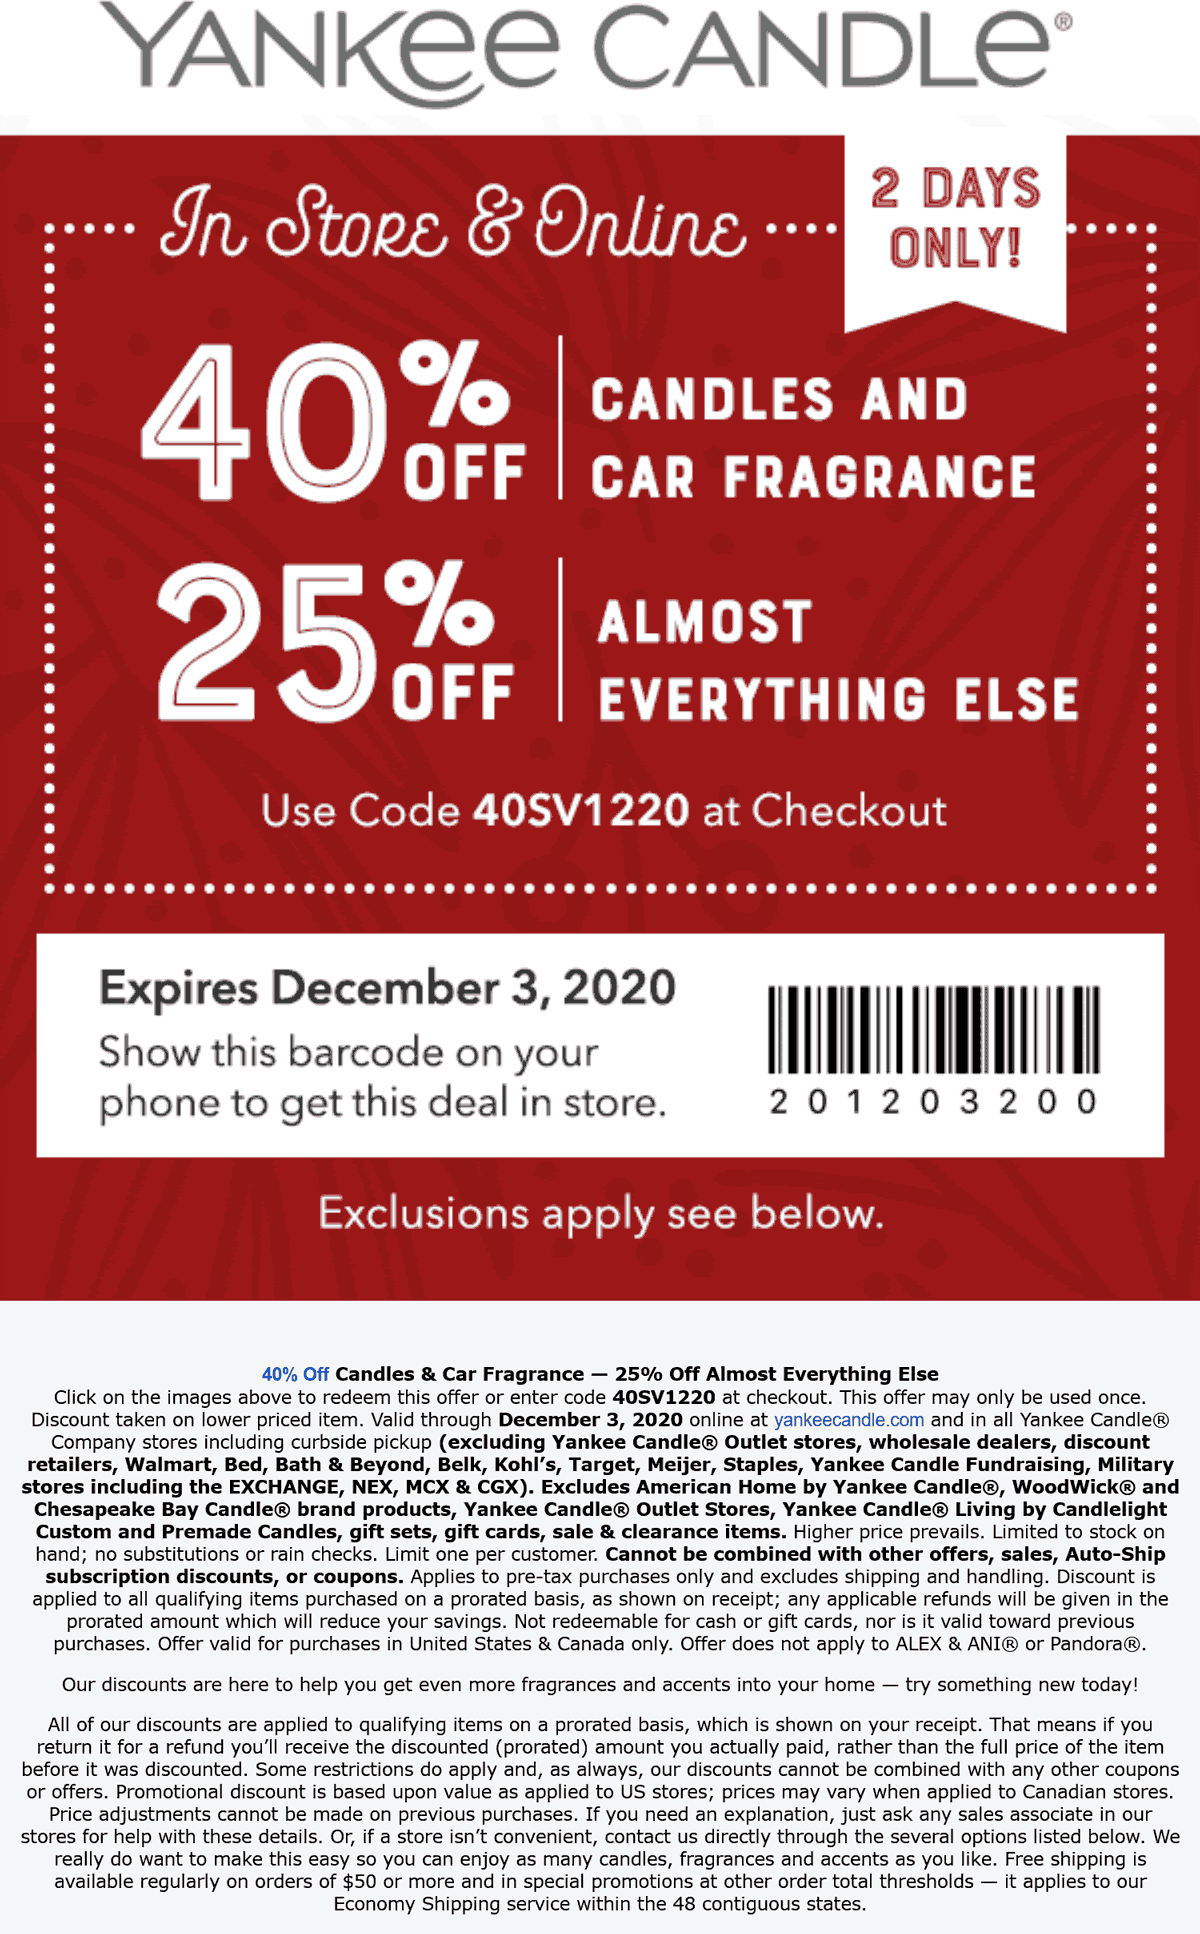 Yankee Candle stores Coupon  40% off candles, fragrance & more at Yankee Candle, or online via promo code 40SV1220 #yankeecandle 